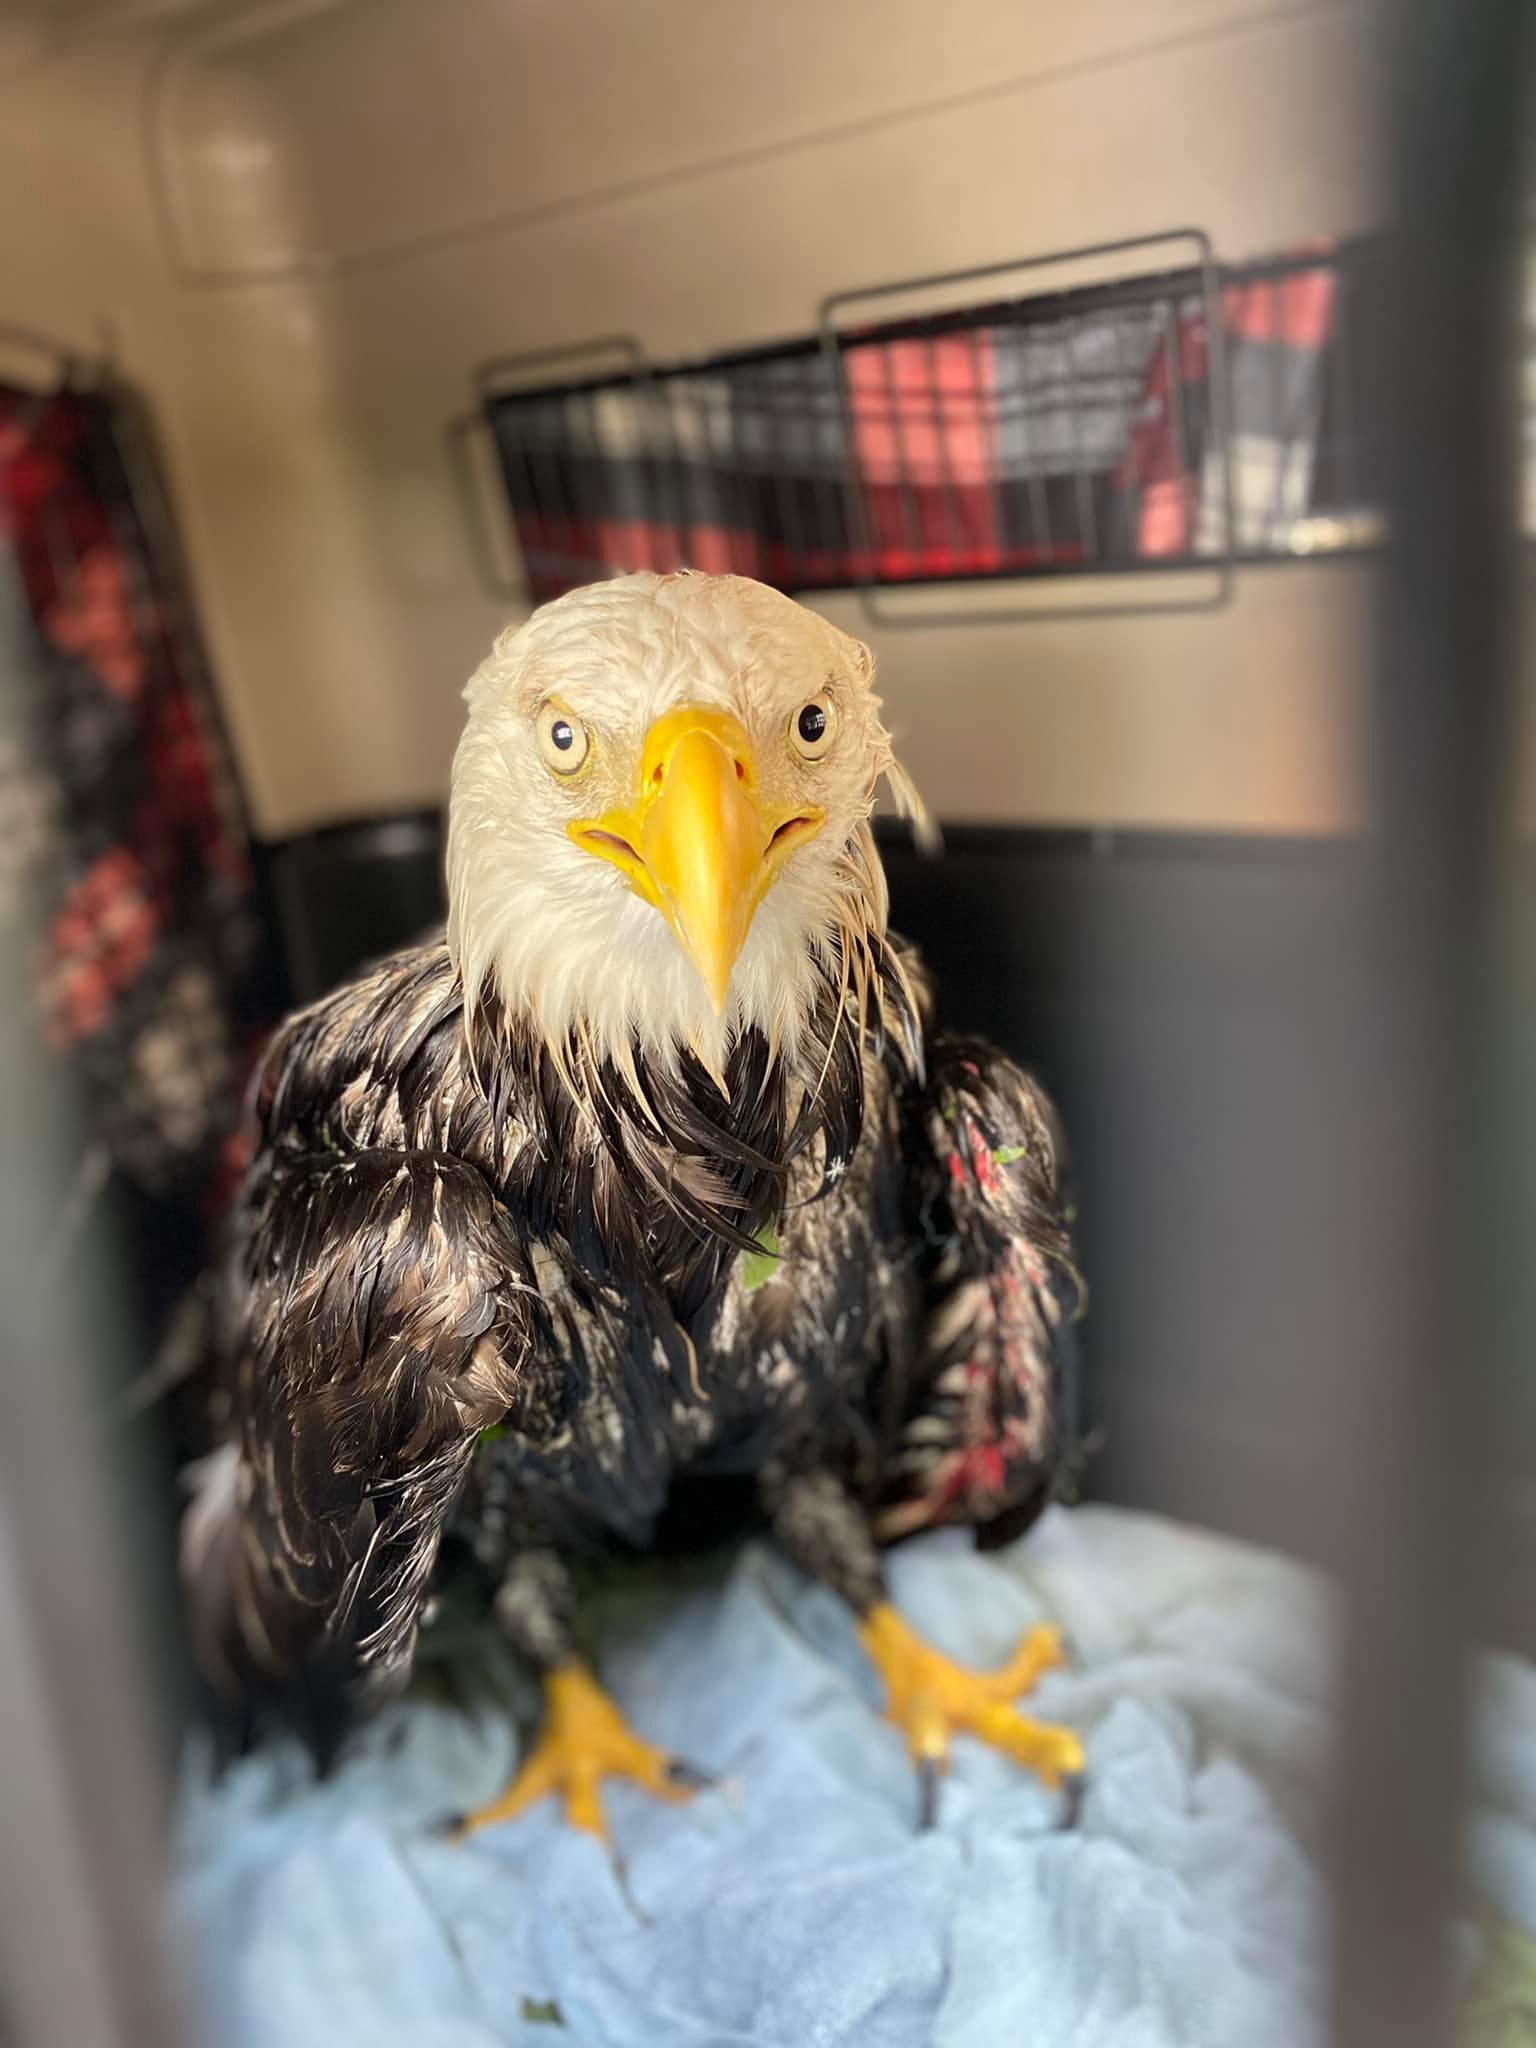 Injured bald eagle rescued from Massachusetts river bank – KIRO 7 News  Seattle